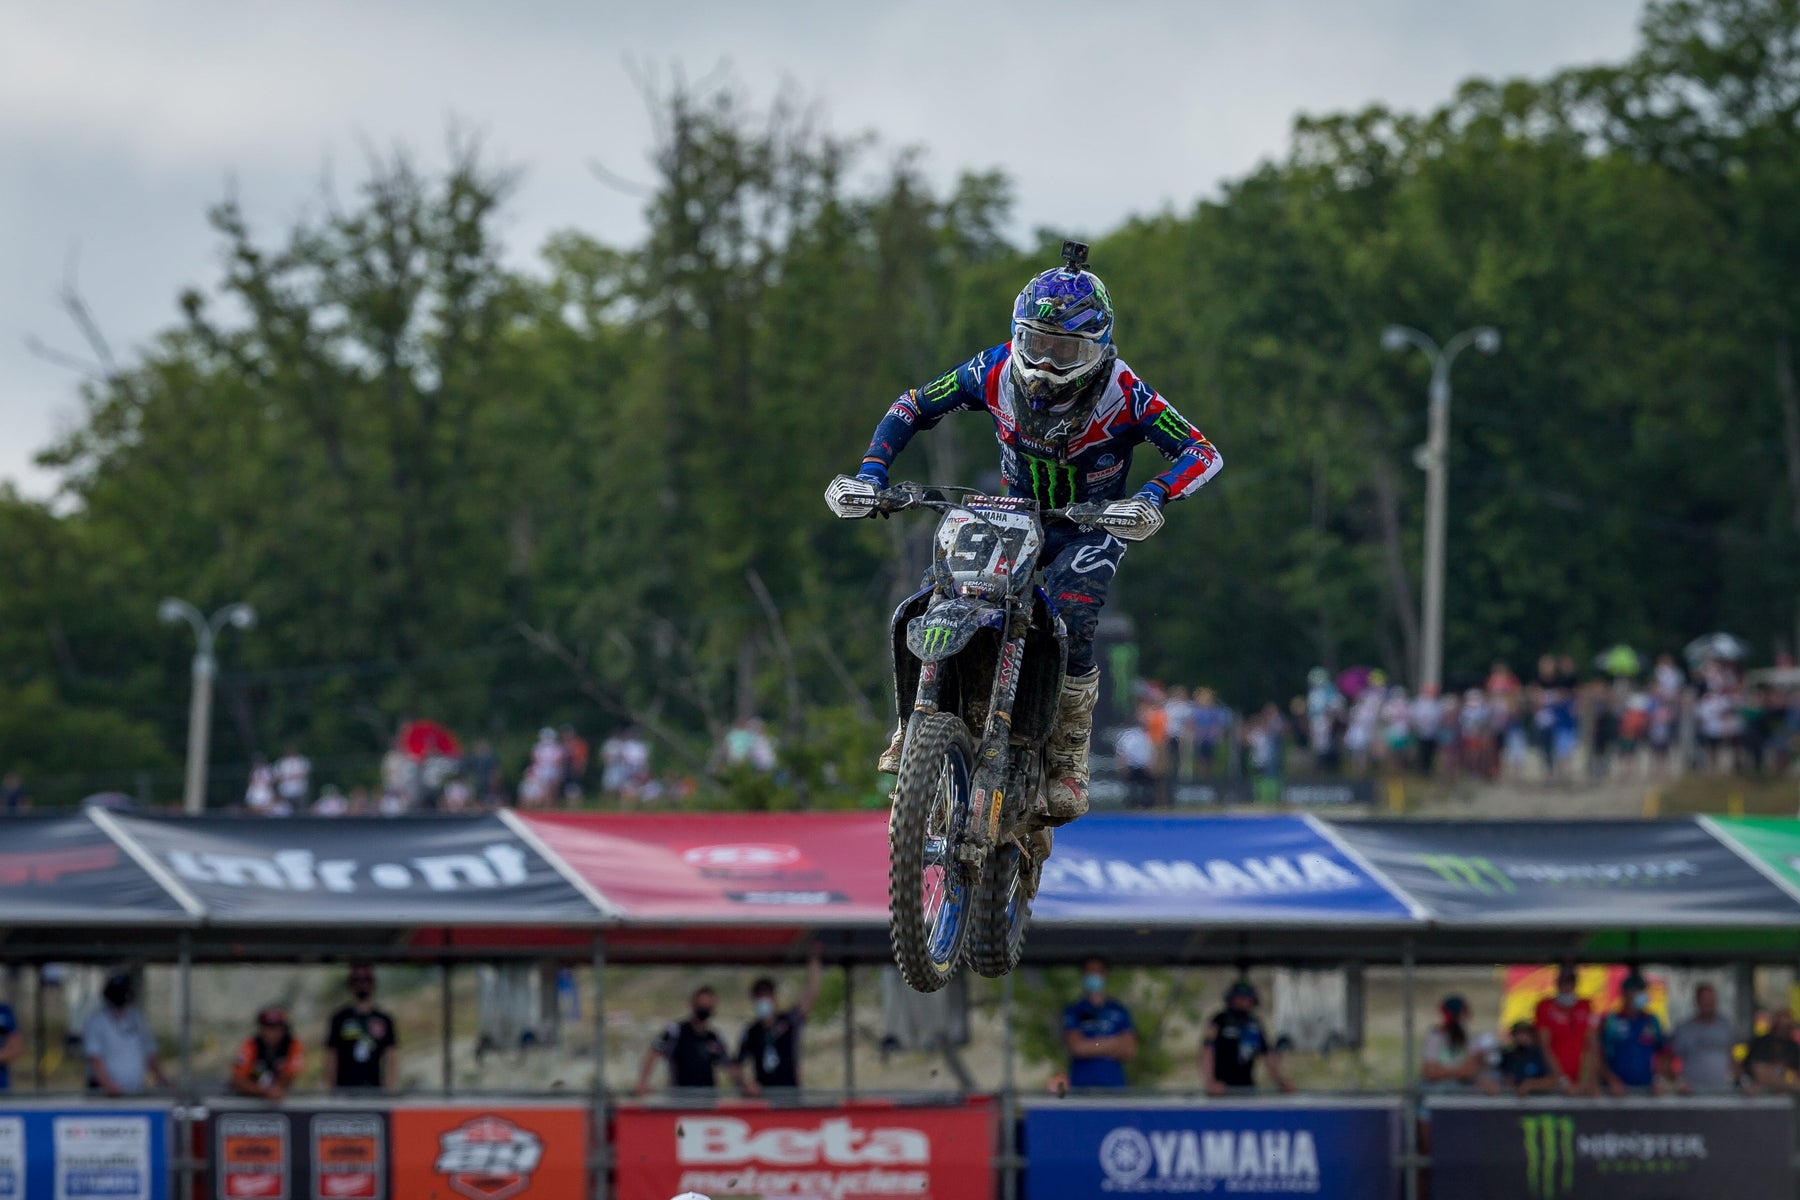 STRONG PERFORMANCES SEE JEREMY SEEWER, GLENN COLDENHOFF AND ROMAIN FEBVRE IN THE MIX FOR MXGP OF CZECH REPUBLIC GLORY AT LOKET